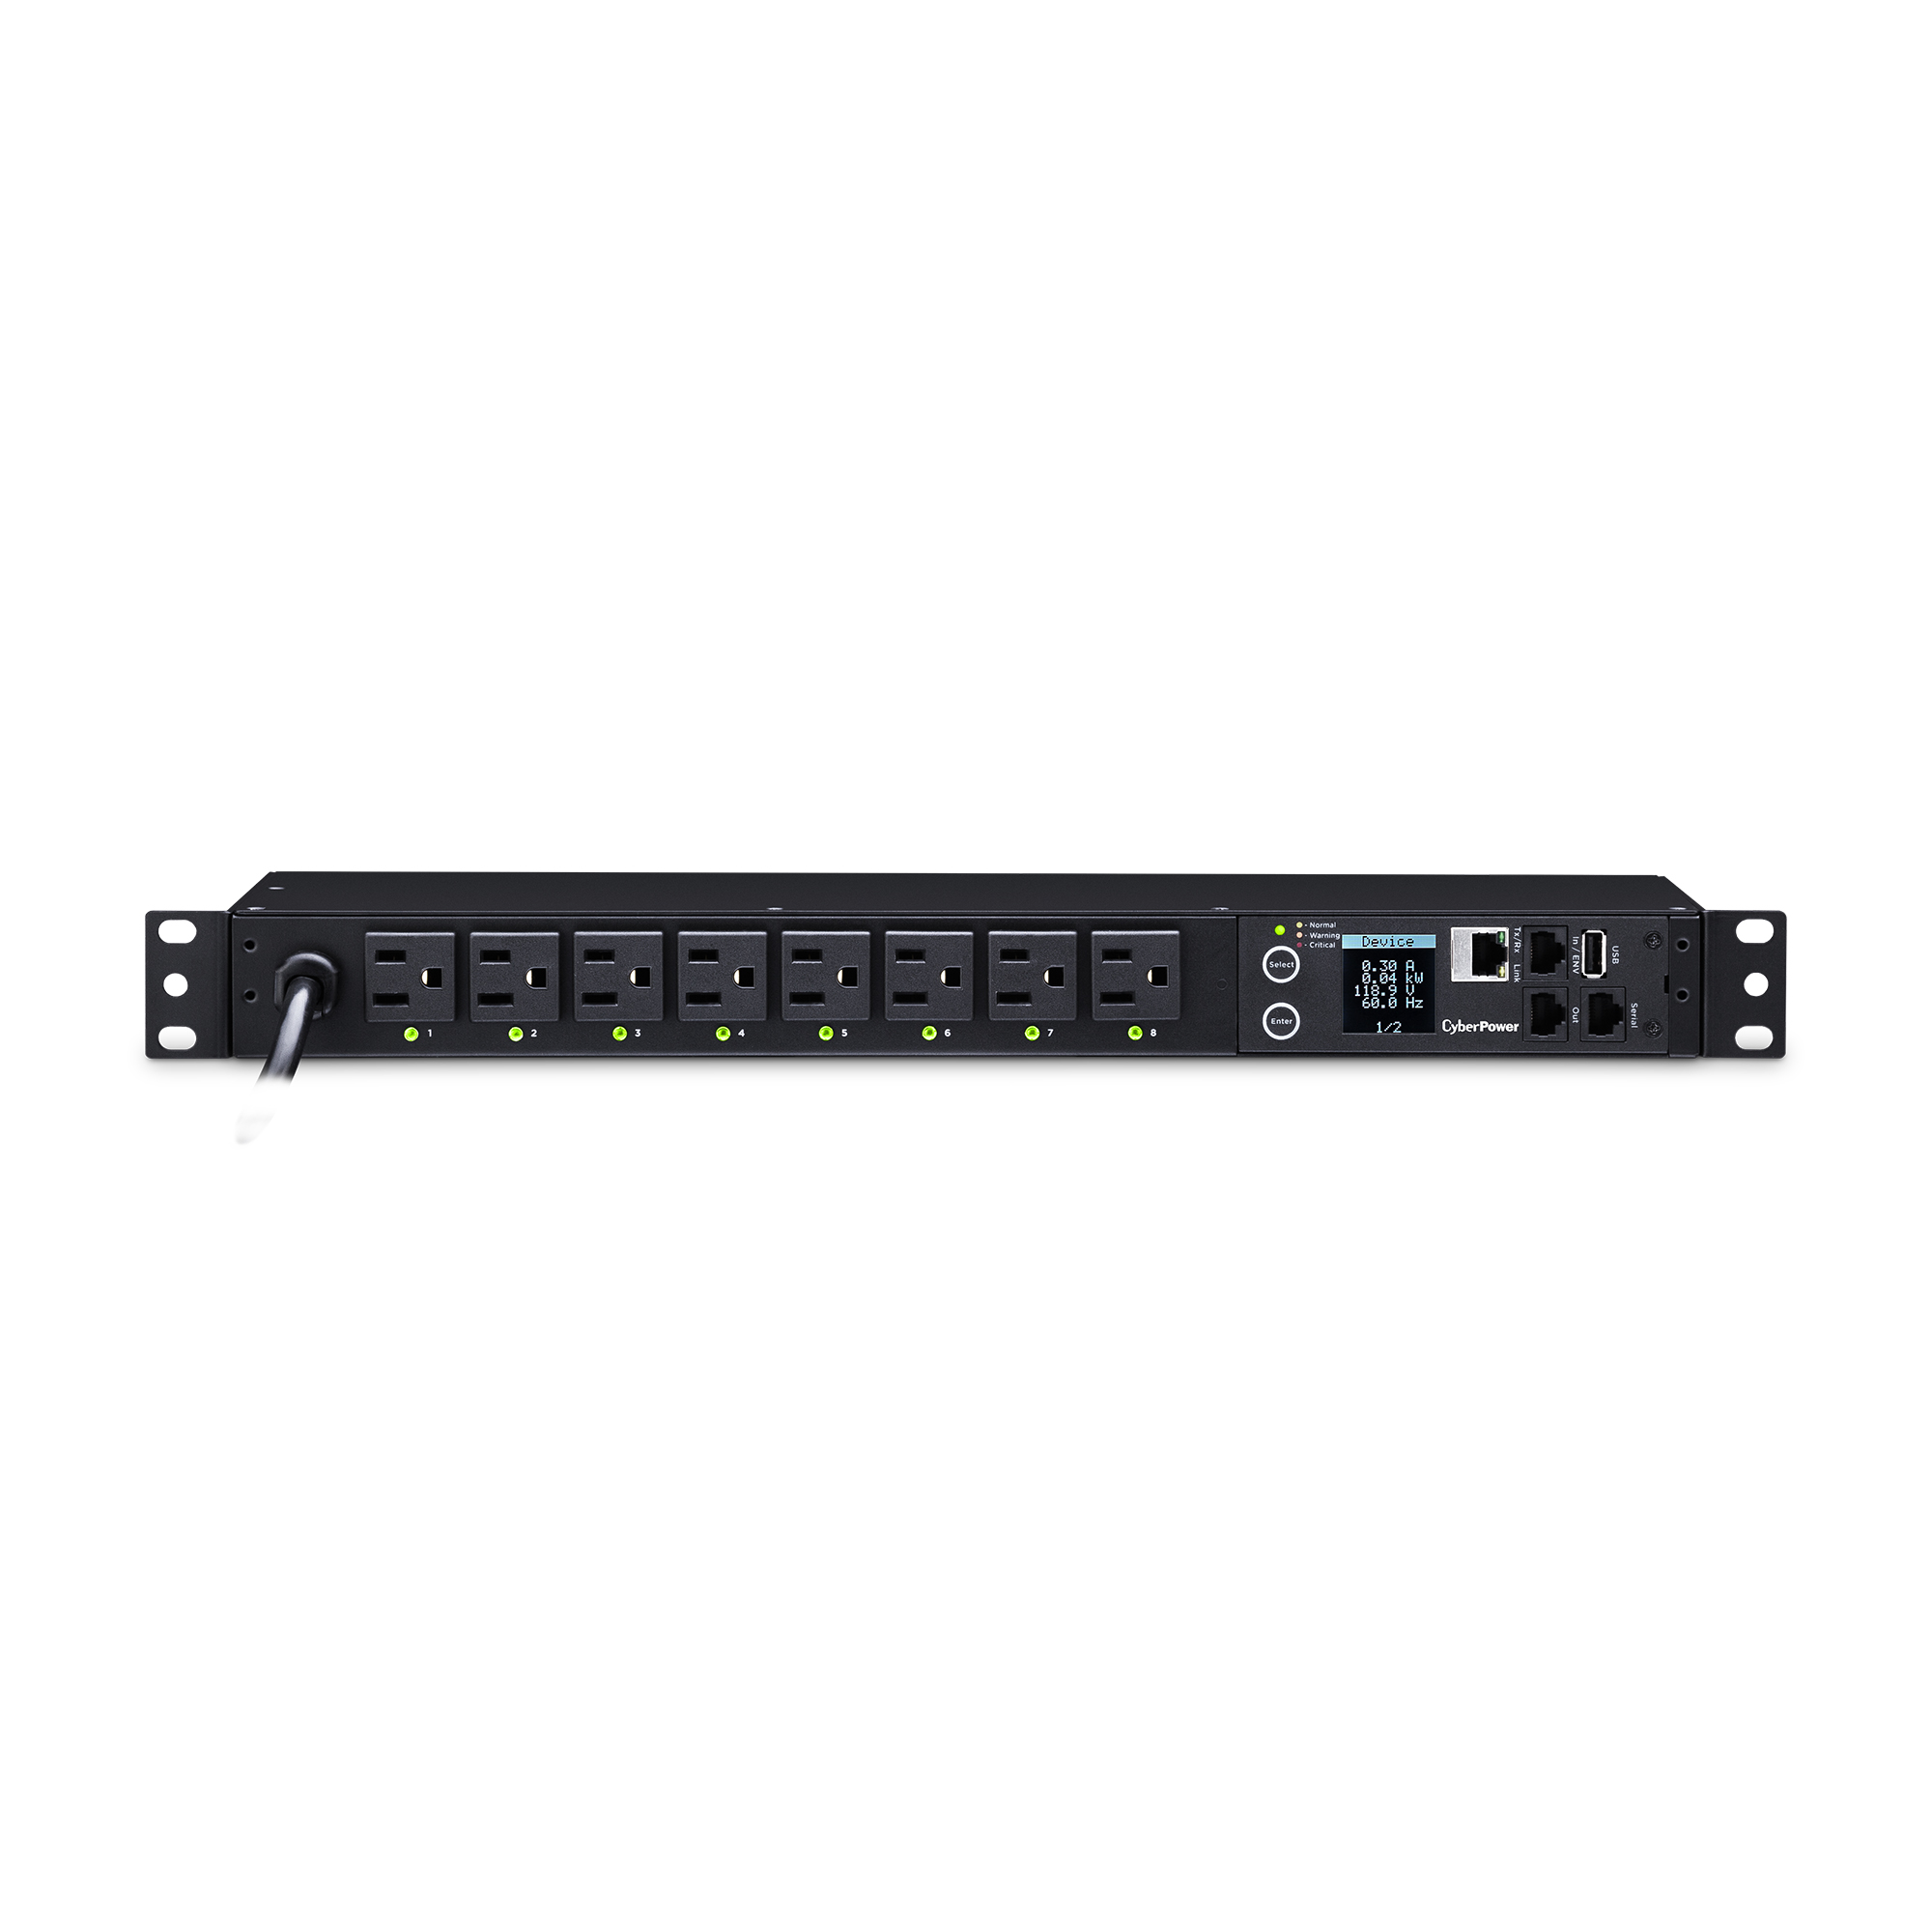 the part number is PDU41001